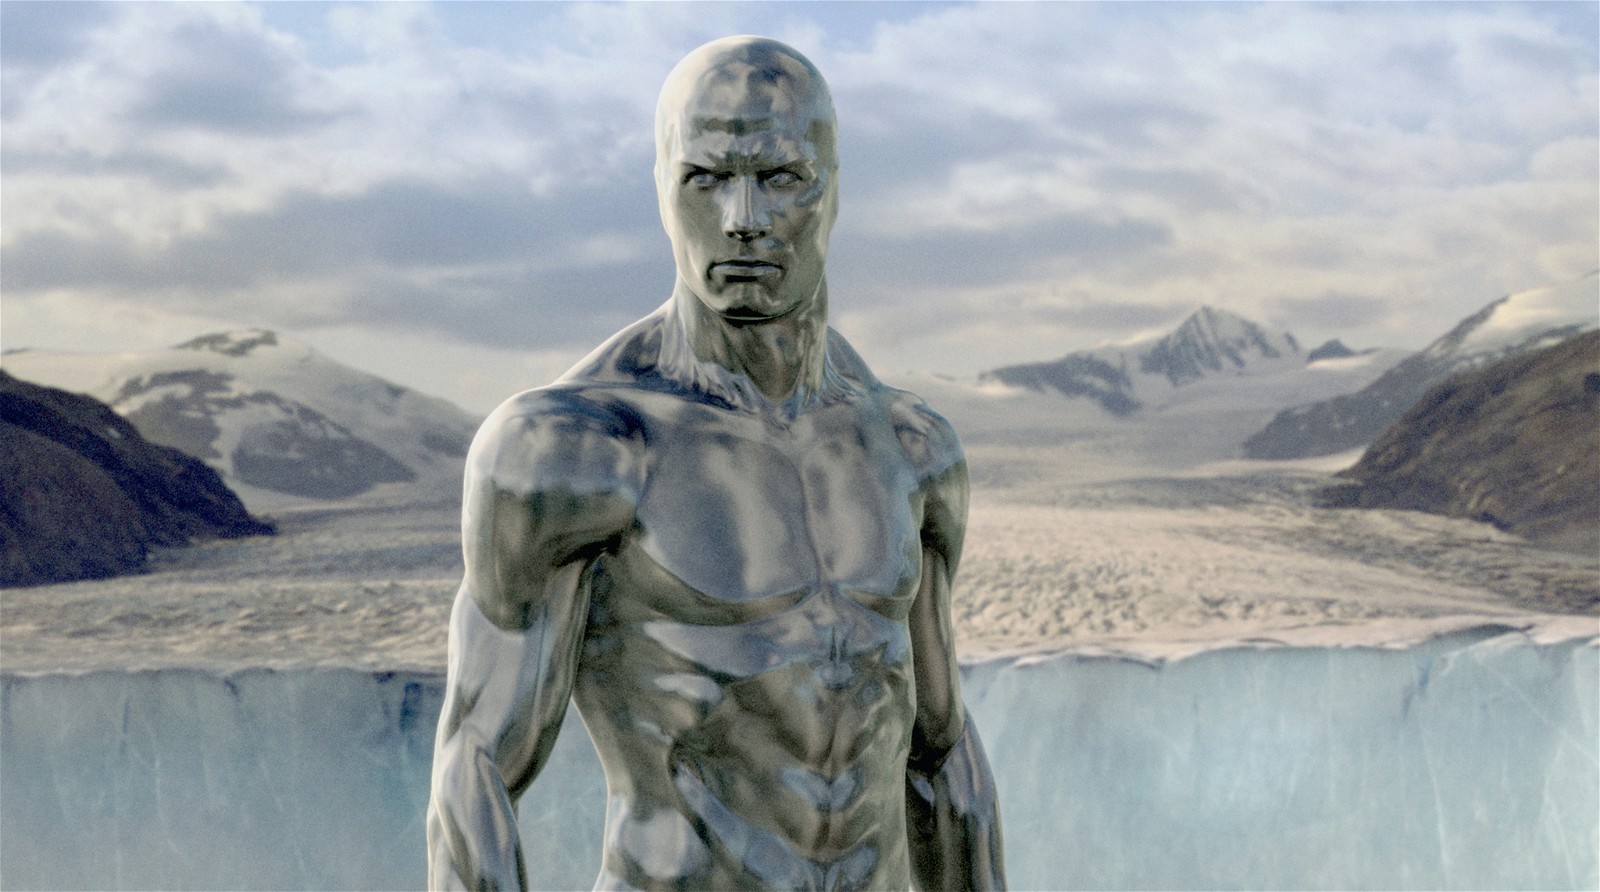 Doug Jones as the Silver Surfer in a still from Fantastic Four: Rise of the Silver Surfer